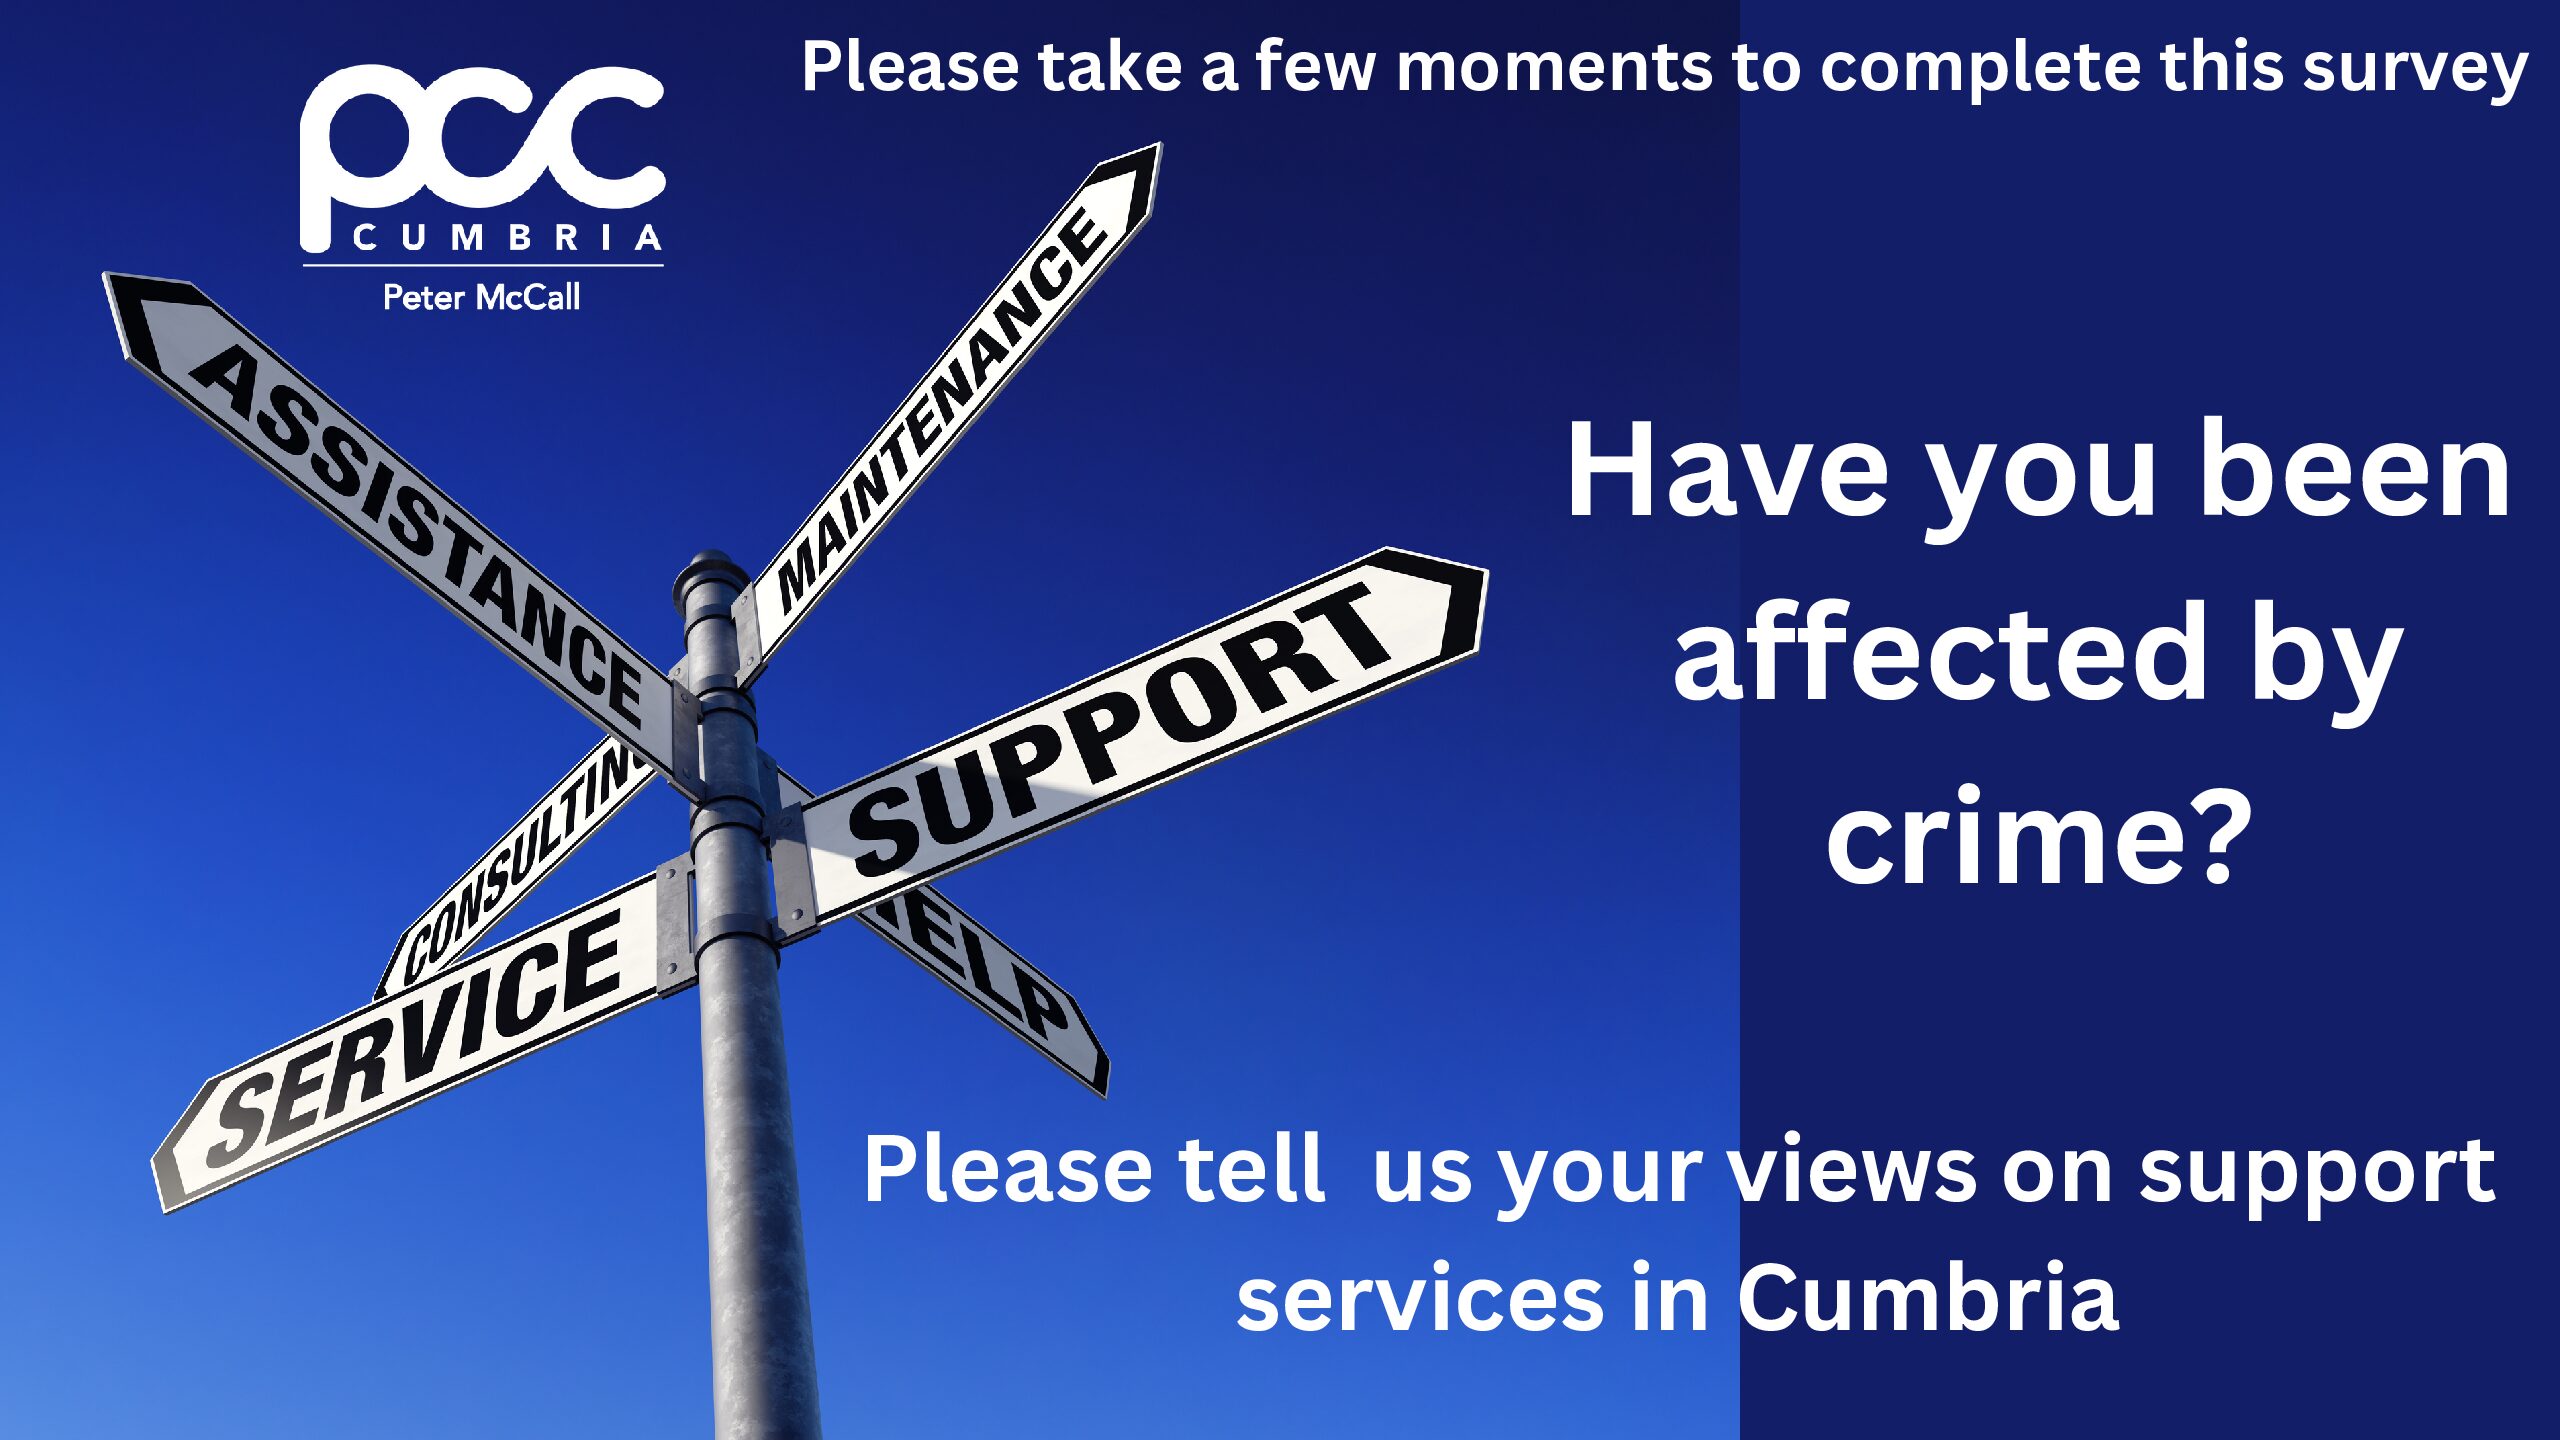 PFCC asks people their views on support services in Cumbria